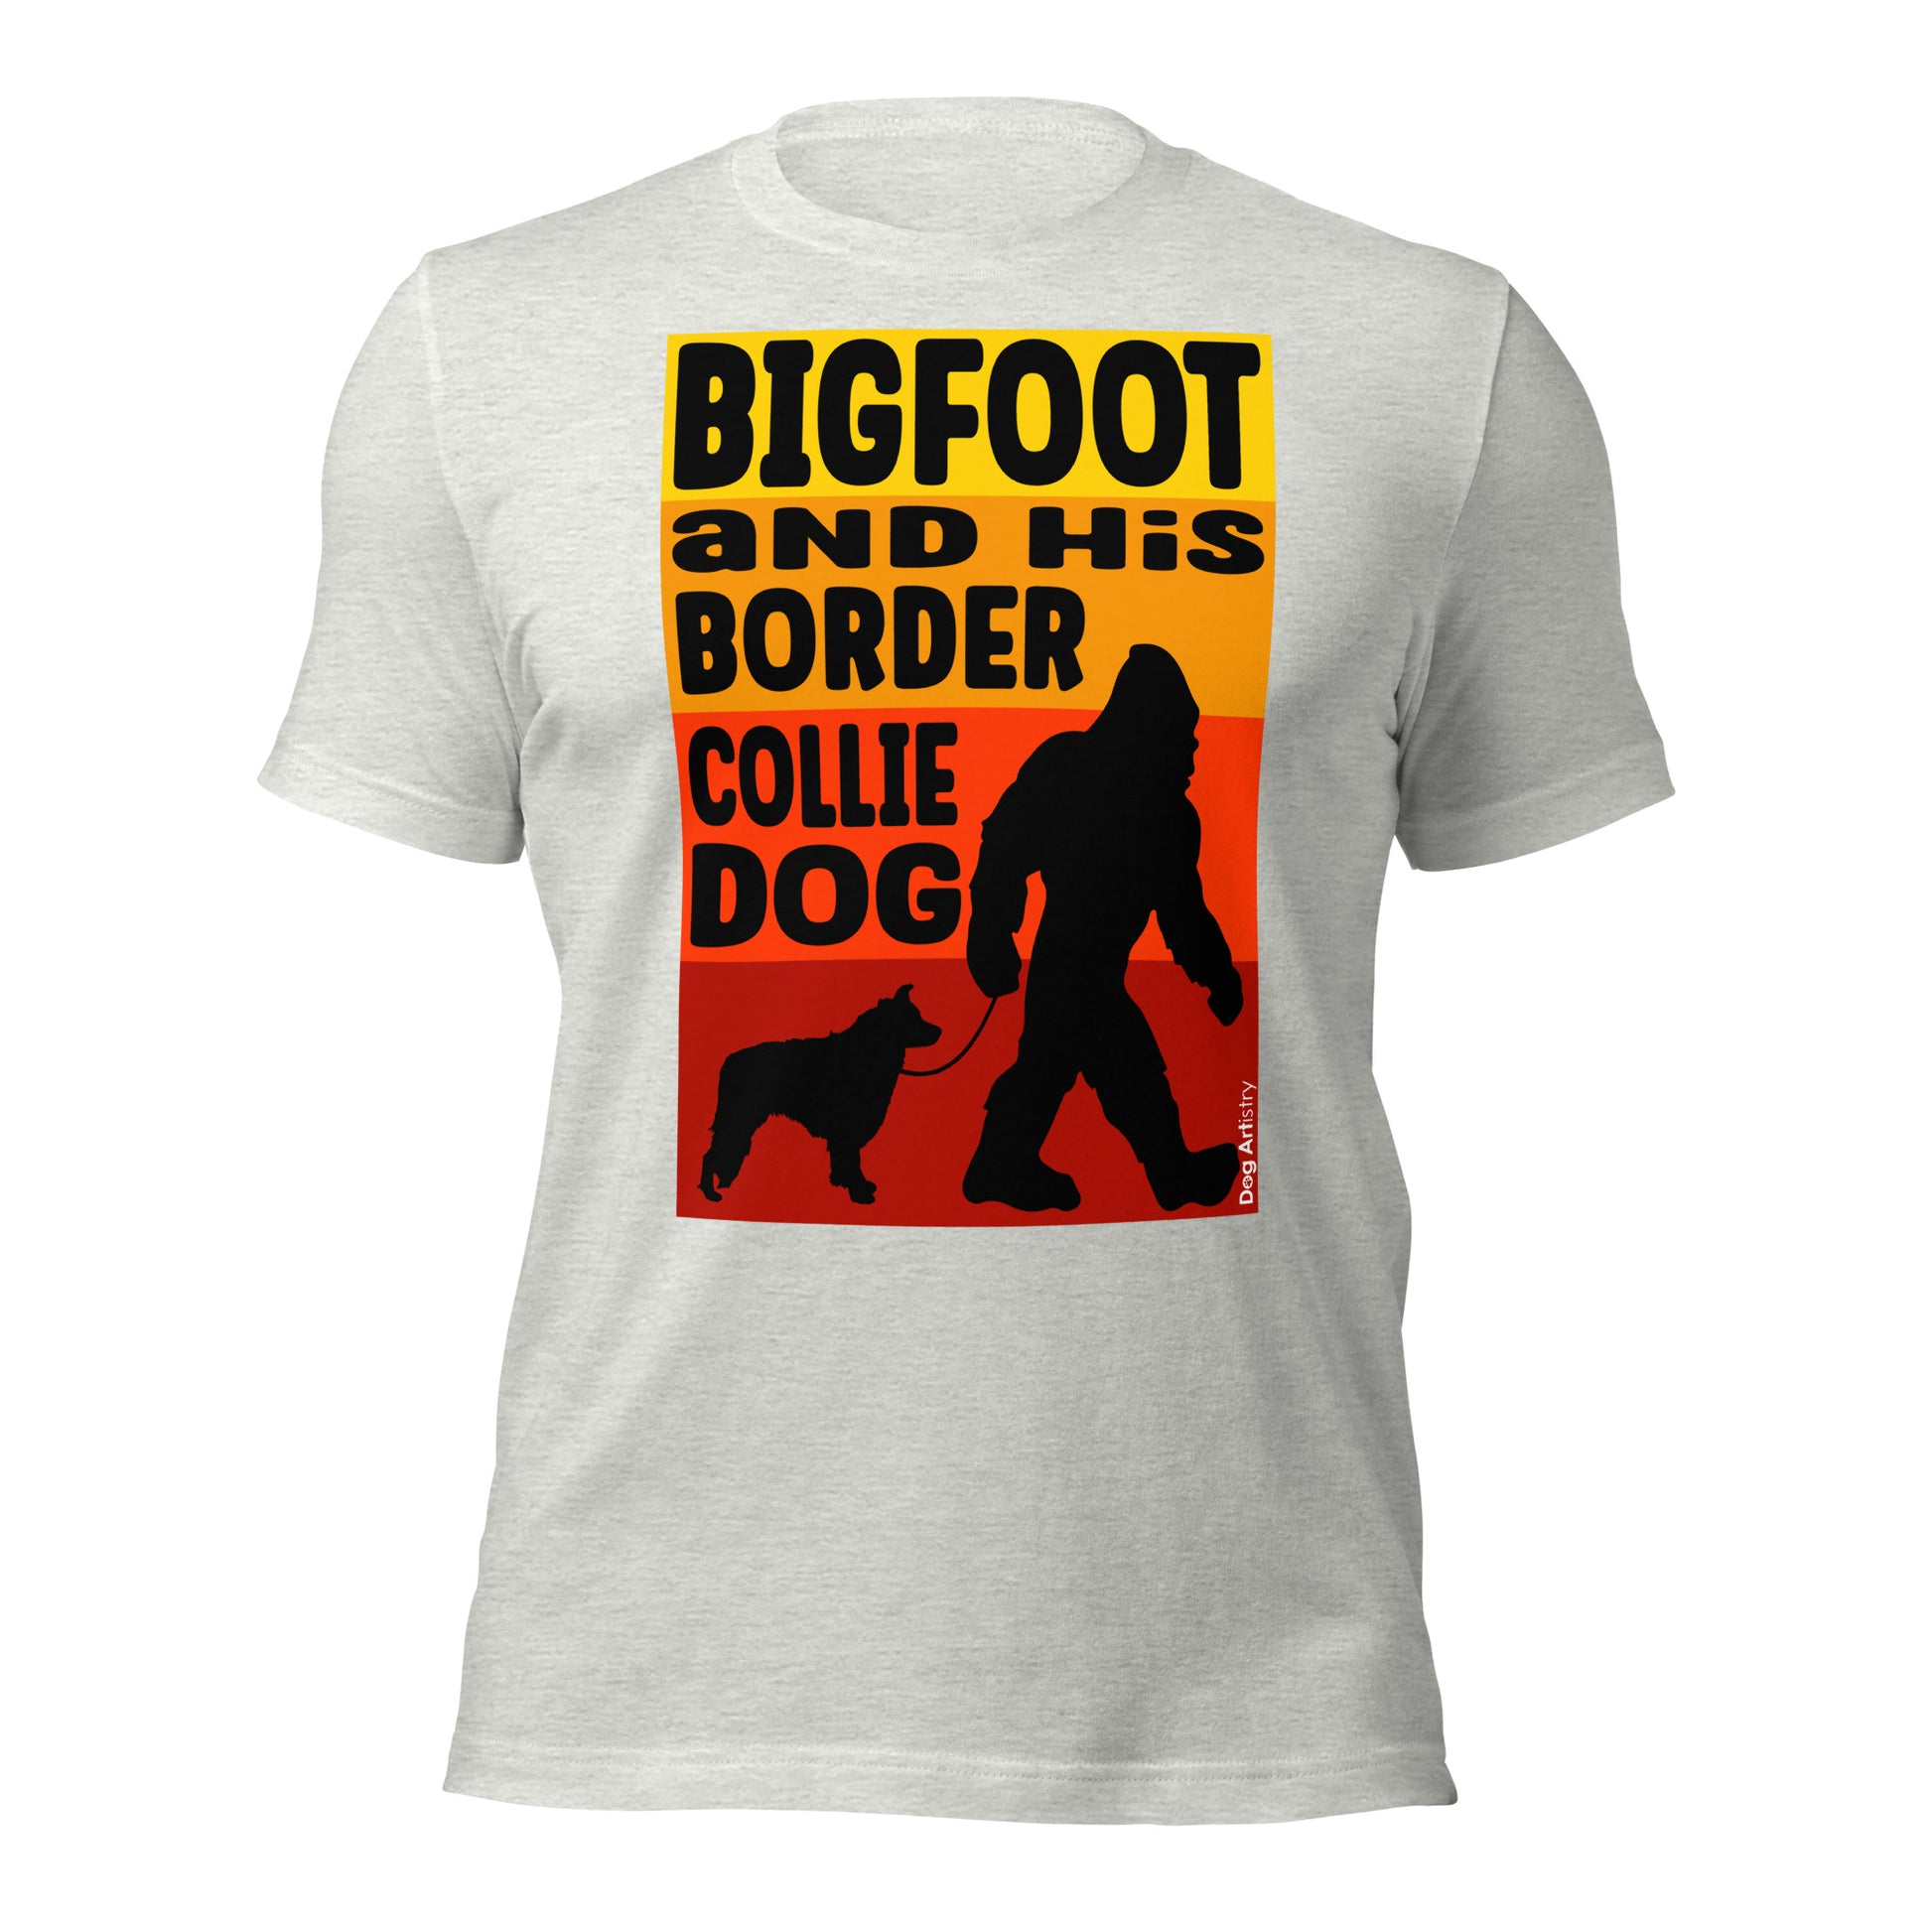 Big foot and his Border Collie unisex ash t-shirt by Dog Artistry.